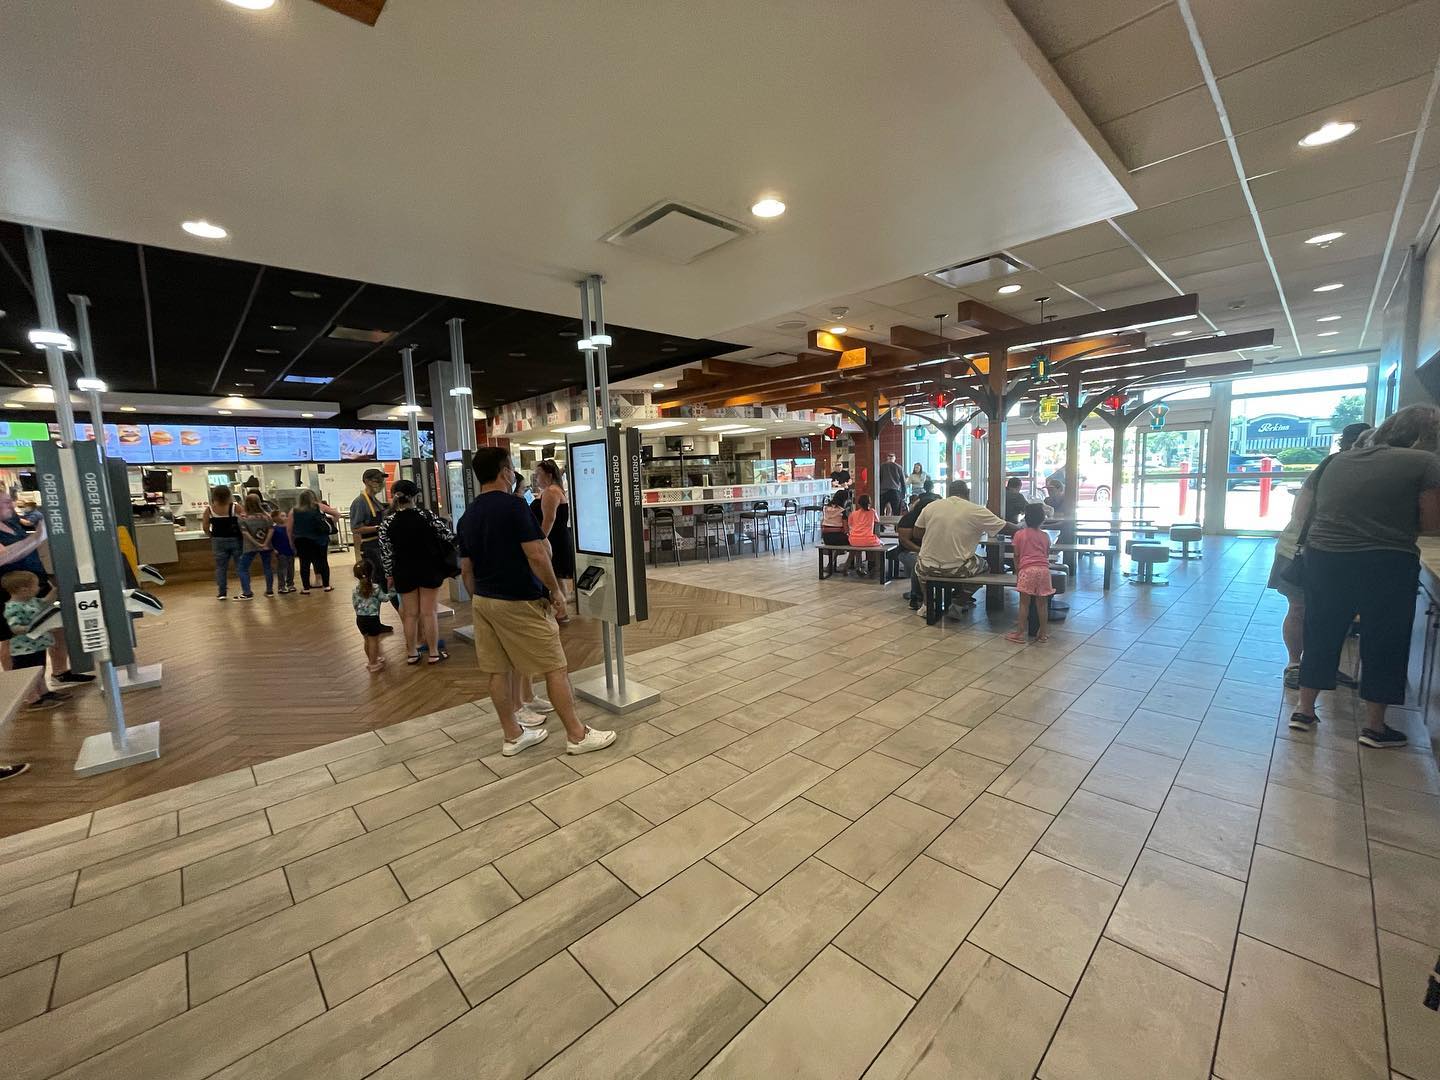 Hall of the Largest McDonald's in Orlando